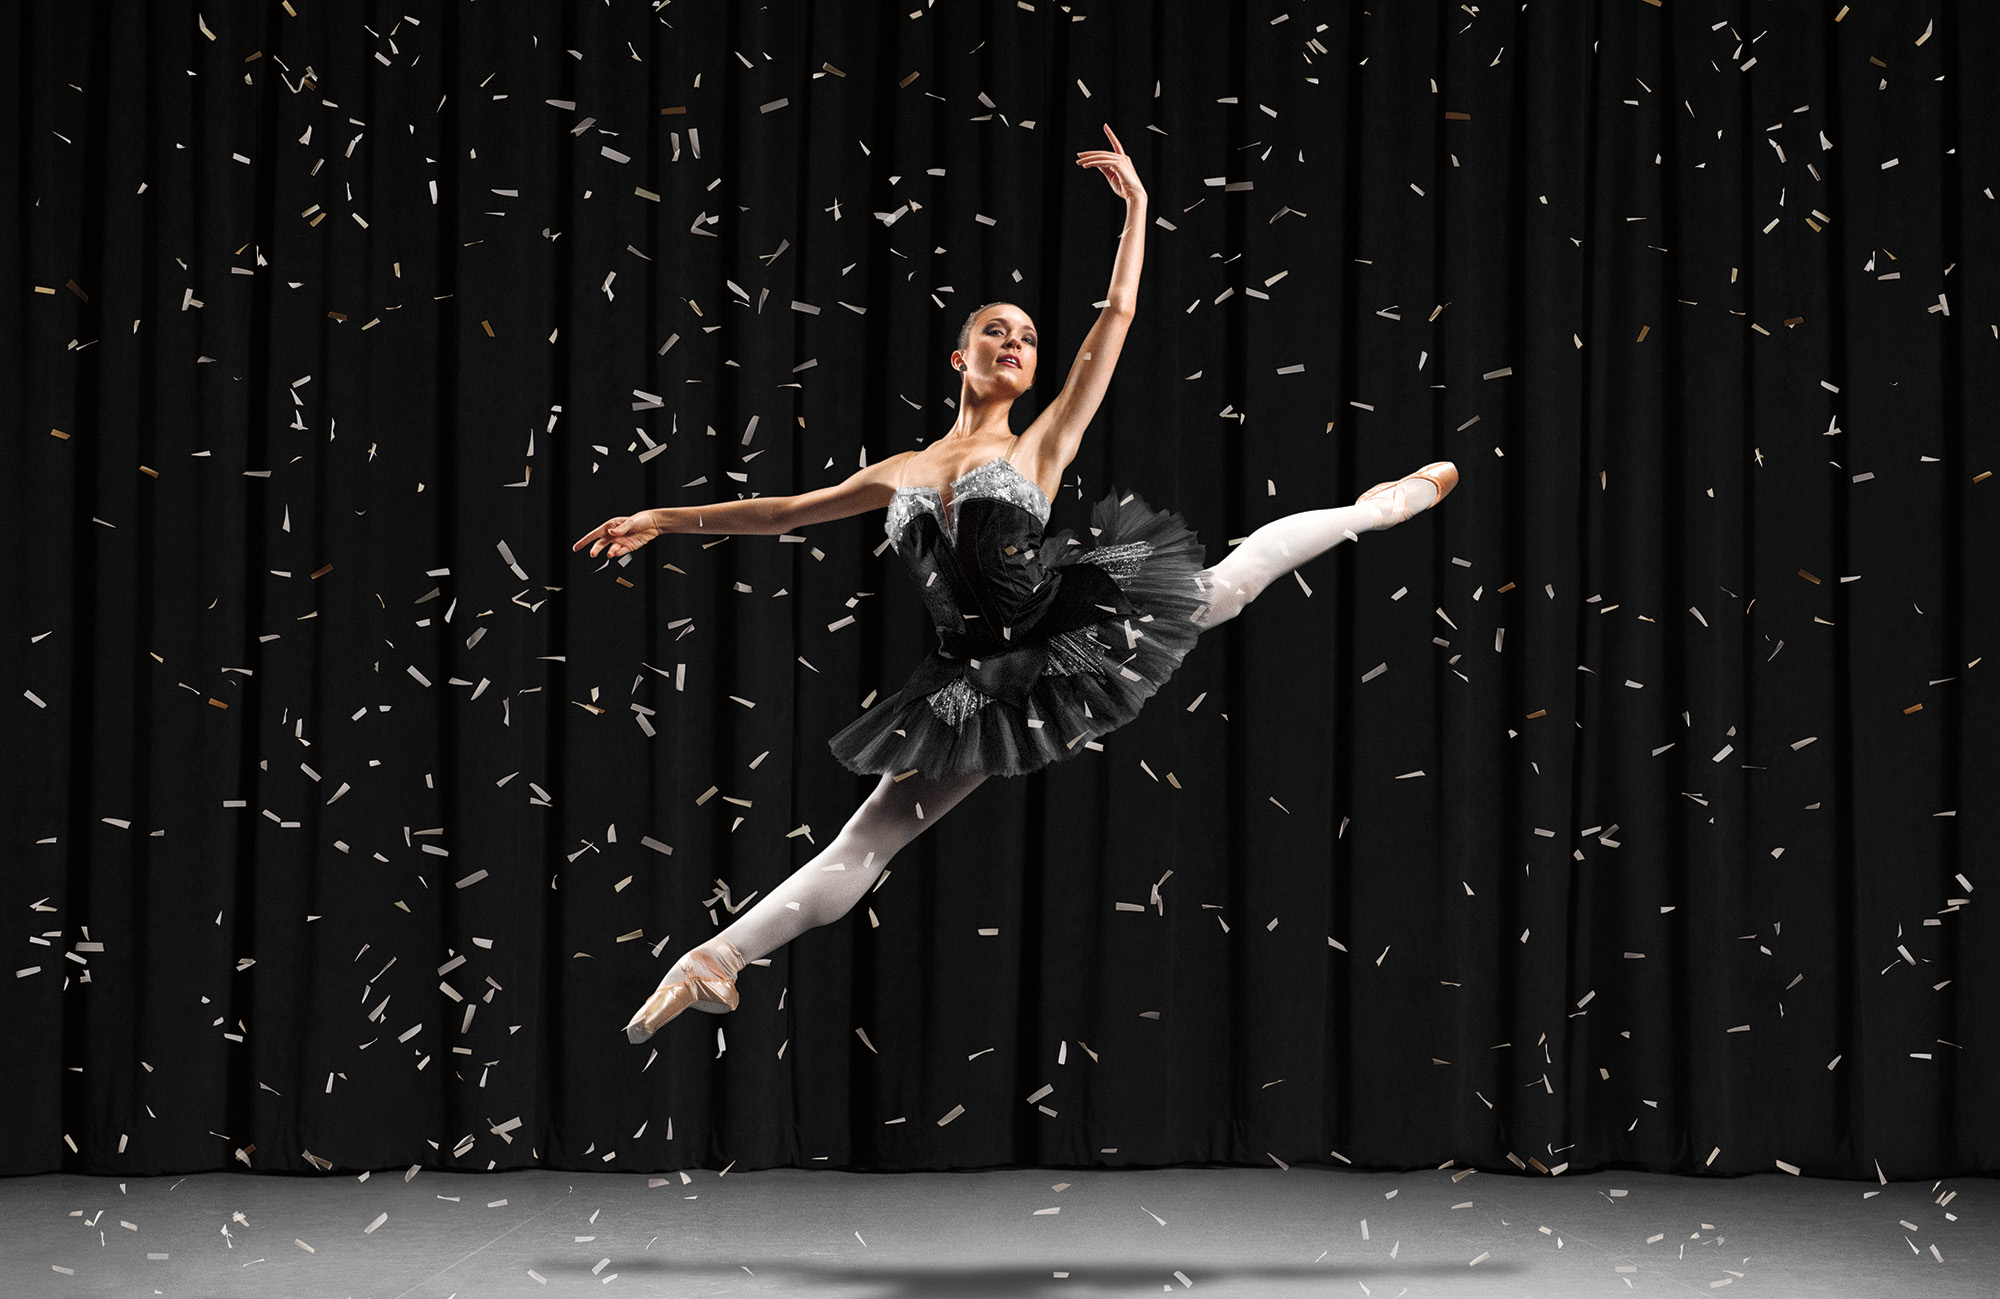 Ballet photoshoot by commercial photographer Blair Bunting for Super Bowl commercial